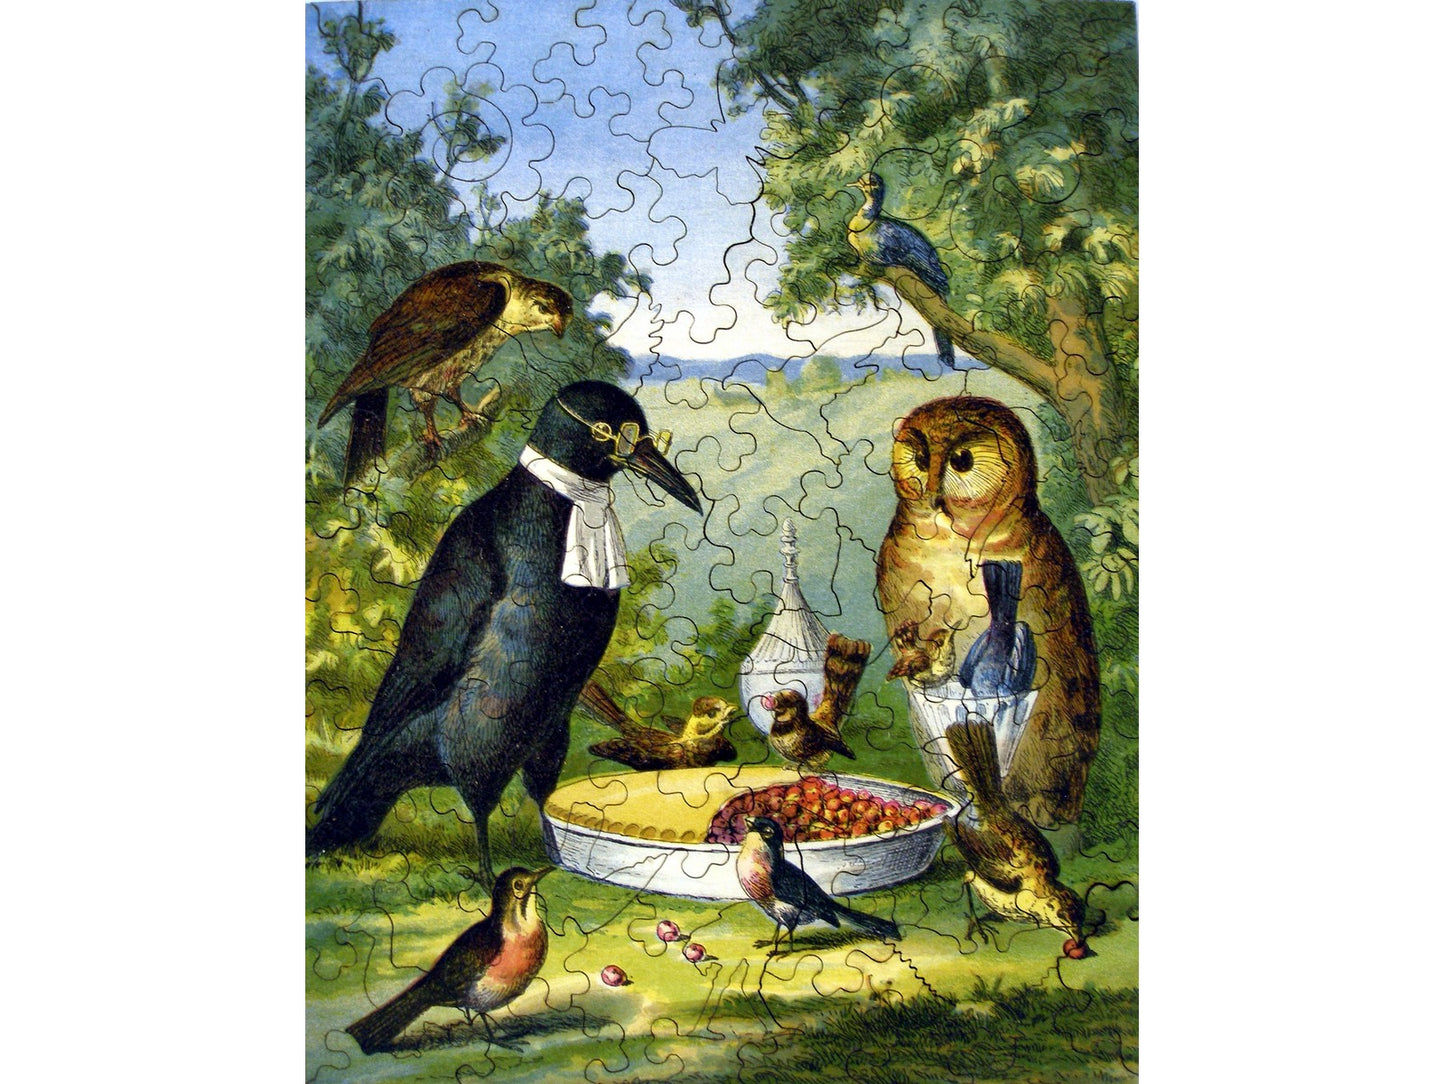 The front of the puzzle, Wedding of Jenny Wren Kids, which shows a group of birds eating a pie.